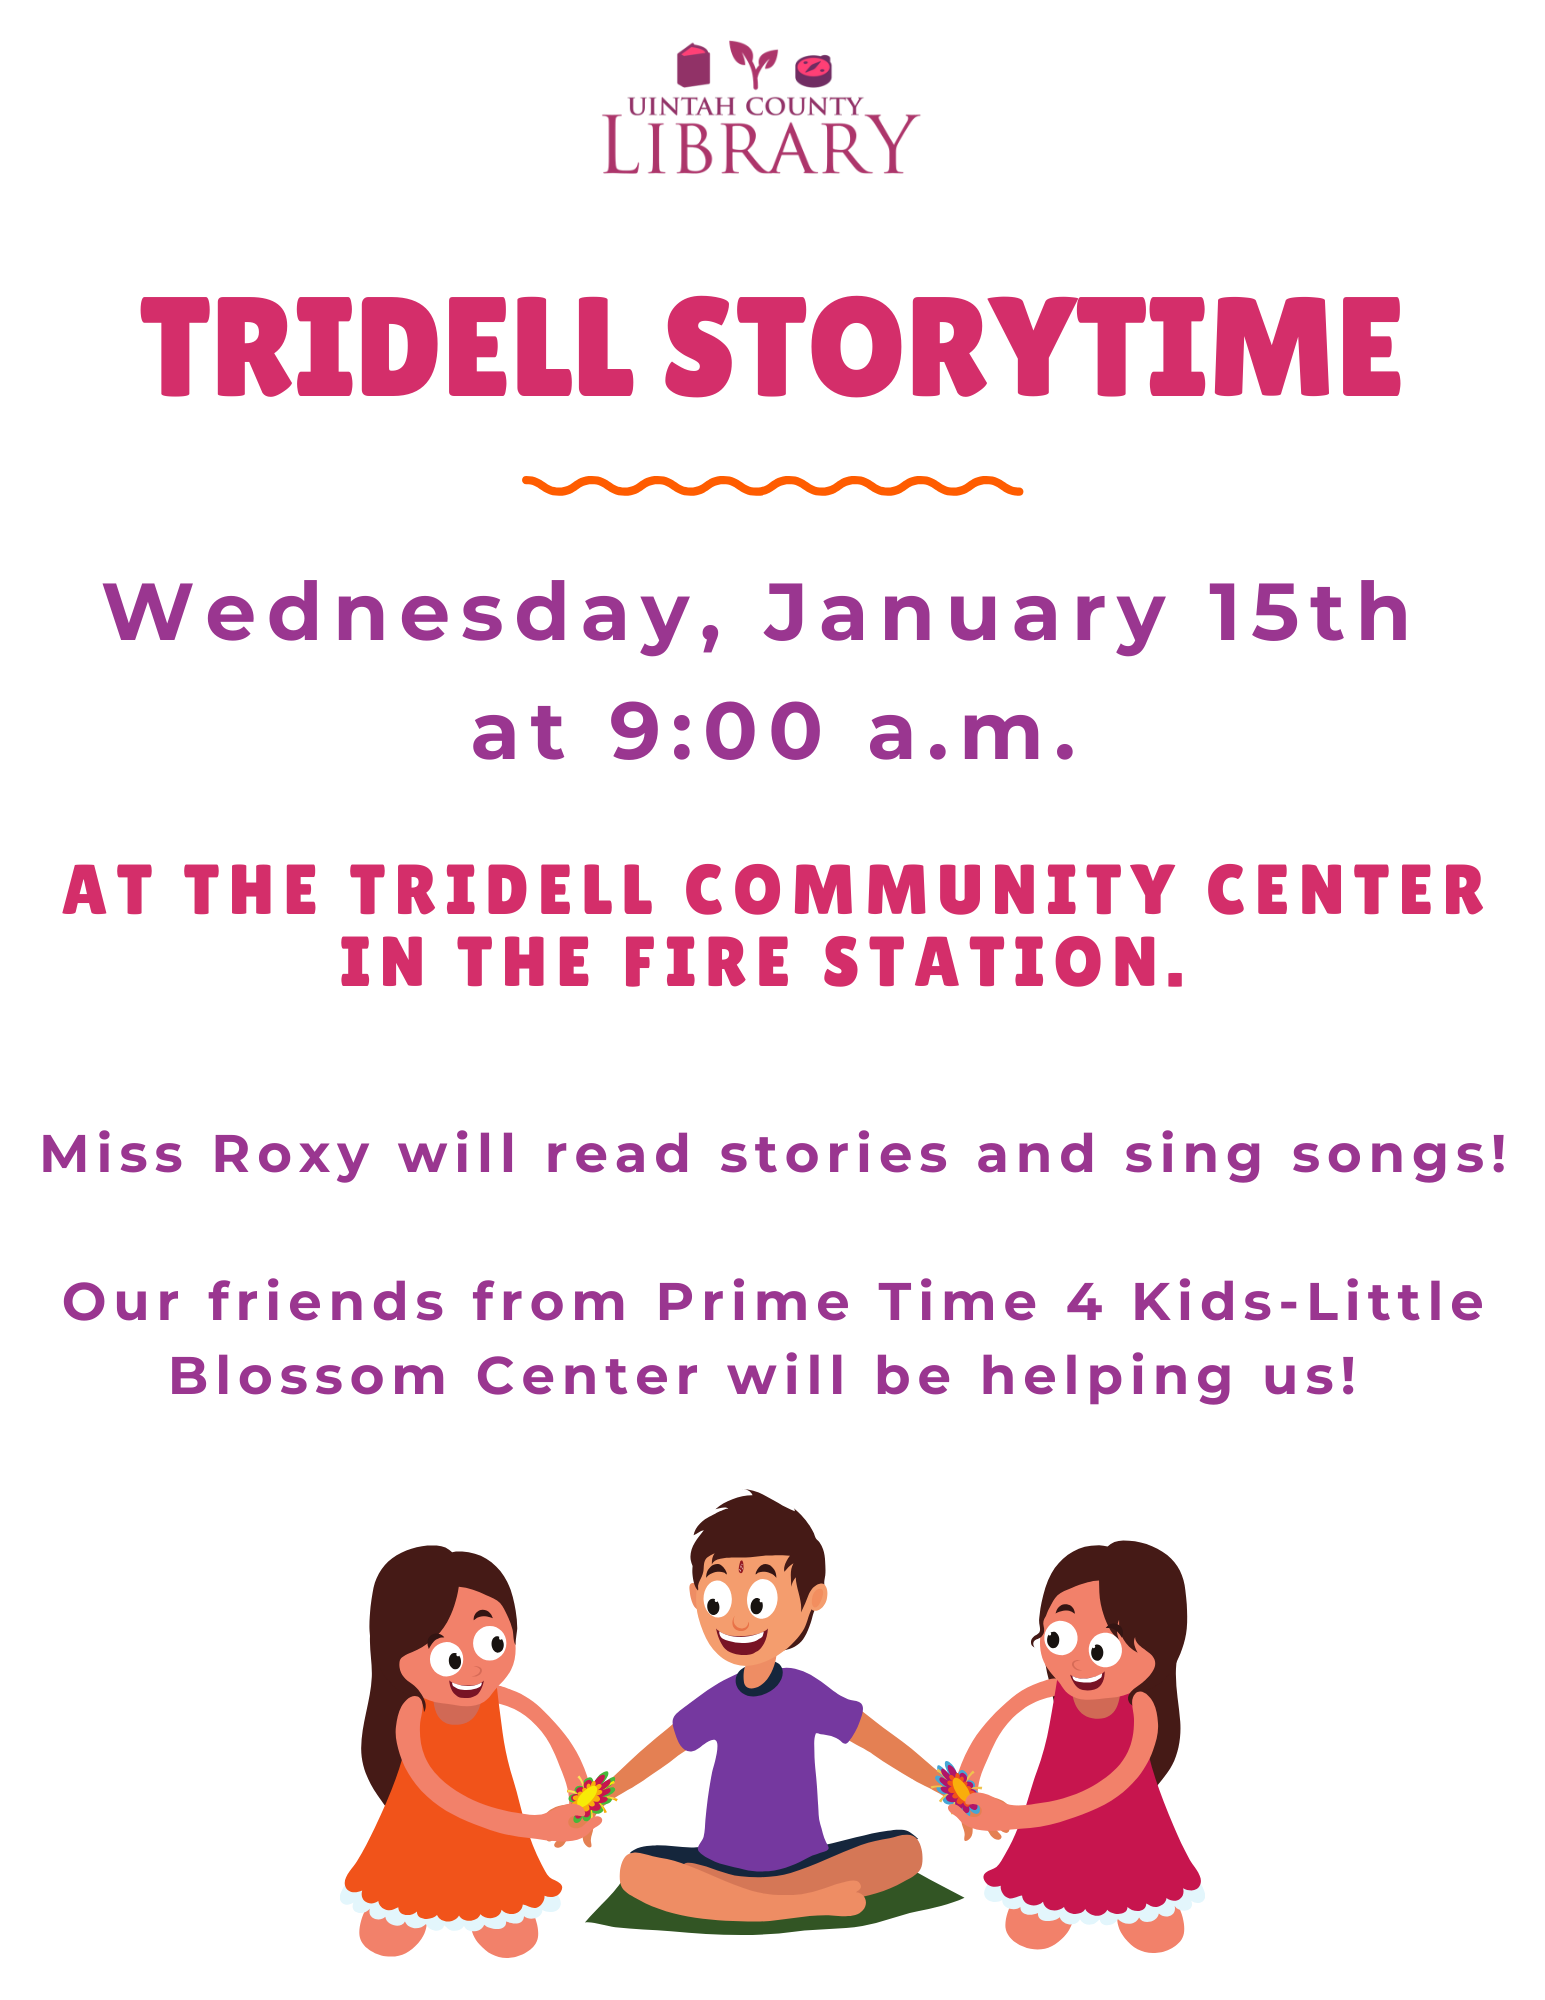 Tridell Storytime Wednesday, January 15th at 9:00 a.m. at the Tridell Community Center in the Fire Station. Miss Roxy will read stories and sing songs! Our friends from Prime Time 4 Kids-Little Blossom Center will be helping us! 